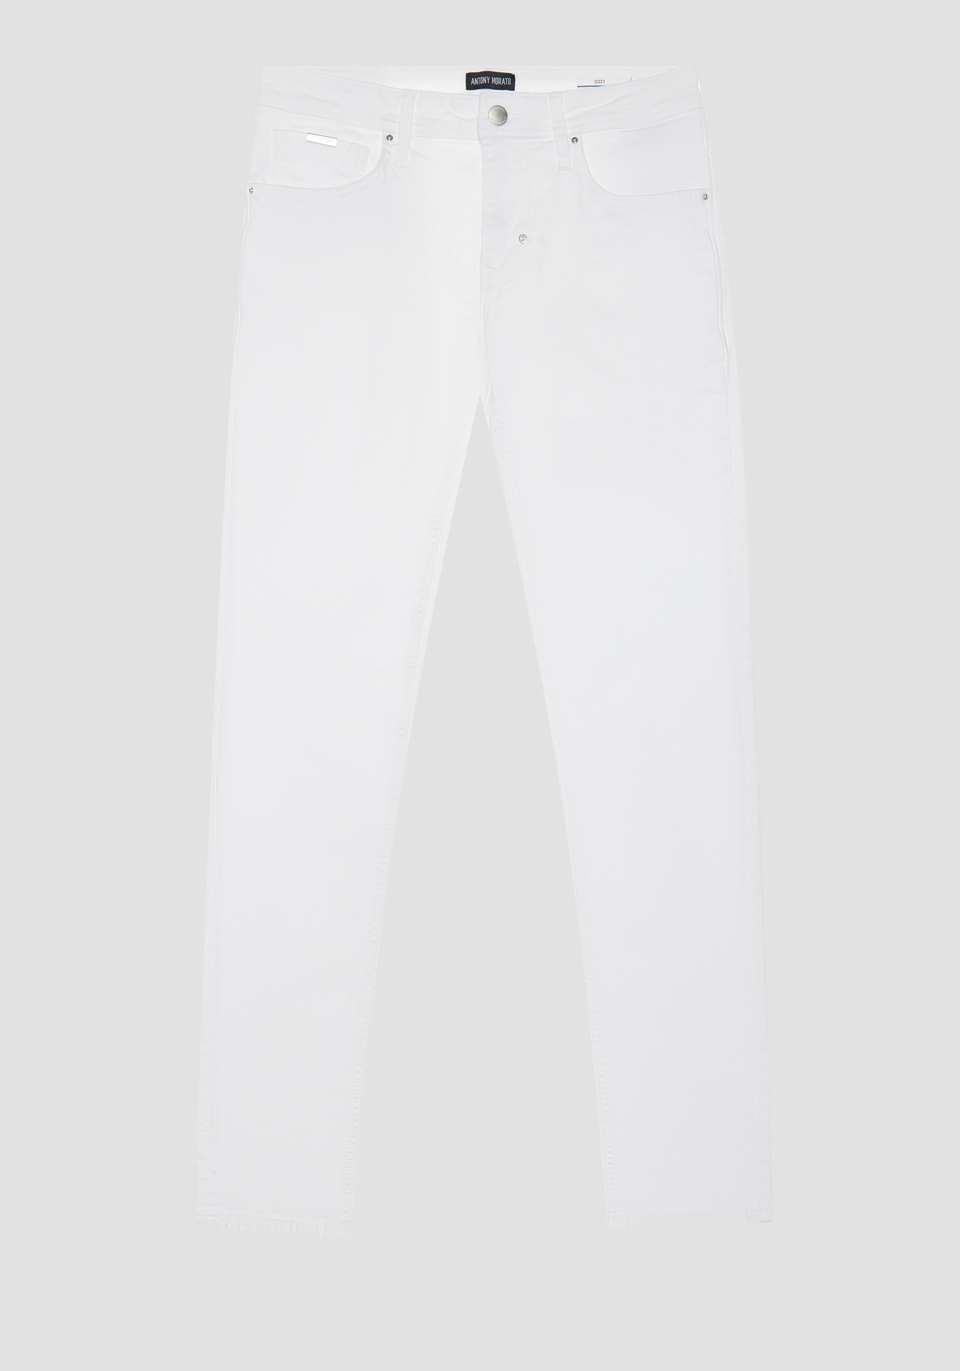 TAPERED FIT "OZZY" JEANS IN POWER STRETCH DENIM - Antony Morato Online Shop